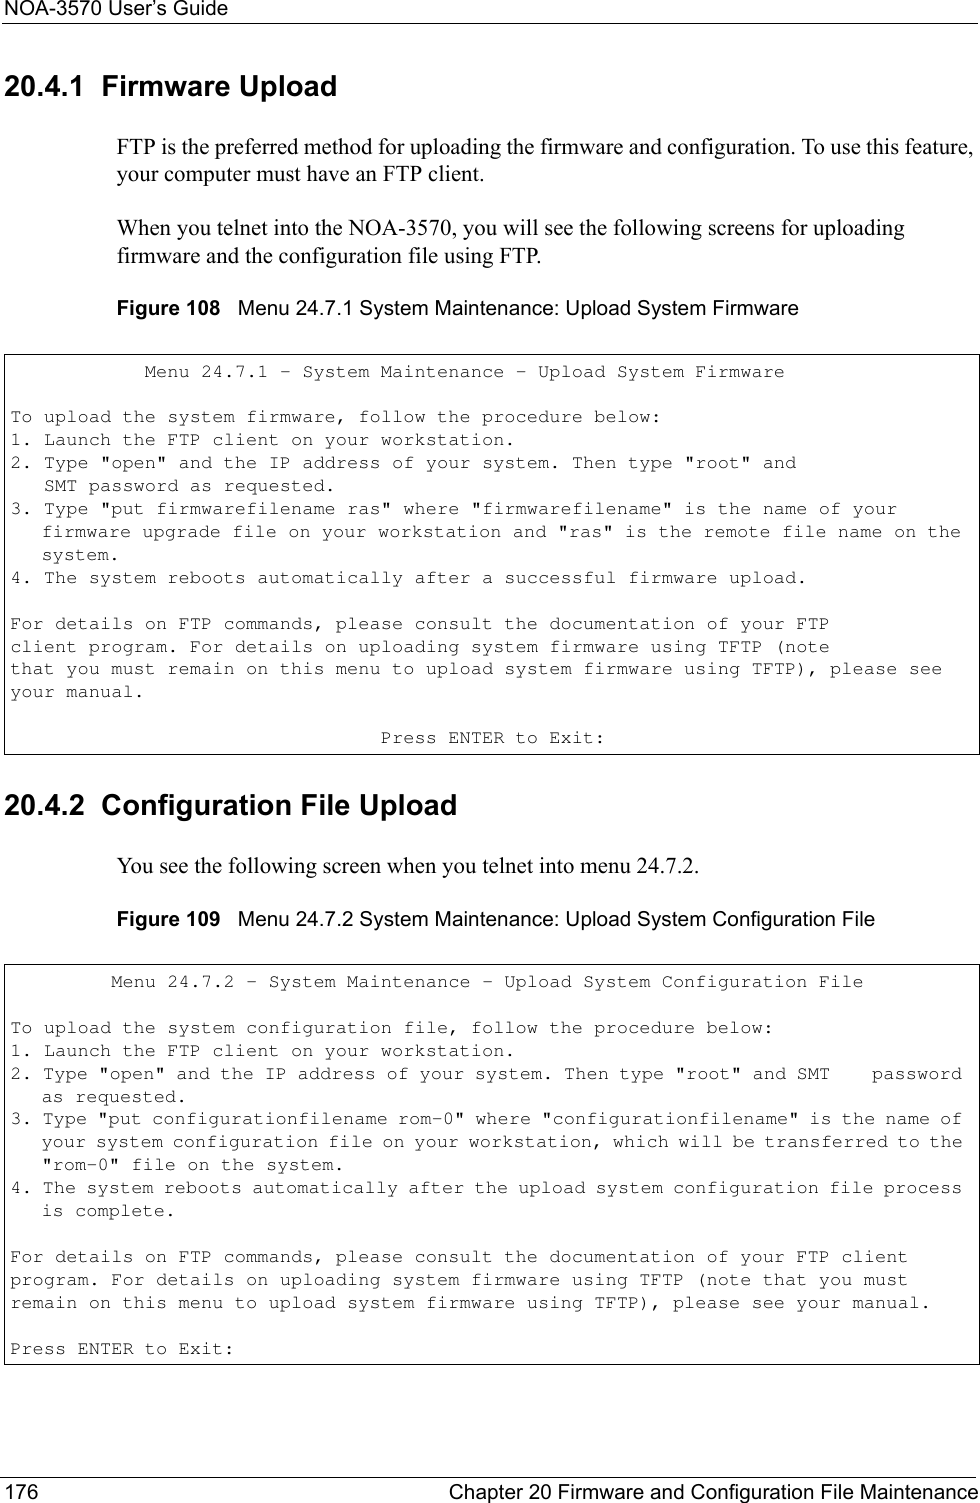 NOA-3570 User’s Guide176 Chapter 20 Firmware and Configuration File Maintenance20.4.1  Firmware UploadFTP is the preferred method for uploading the firmware and configuration. To use this feature, your computer must have an FTP client. When you telnet into the NOA-3570, you will see the following screens for uploading firmware and the configuration file using FTP.Figure 108   Menu 24.7.1 System Maintenance: Upload System Firmware20.4.2  Configuration File UploadYou see the following screen when you telnet into menu 24.7.2.Figure 109   Menu 24.7.2 System Maintenance: Upload System Configuration File            Menu 24.7.1 - System Maintenance - Upload System FirmwareTo upload the system firmware, follow the procedure below:1. Launch the FTP client on your workstation.2. Type &quot;open&quot; and the IP address of your system. Then type &quot;root&quot; and   SMT password as requested.3. Type &quot;put firmwarefilename ras&quot; where &quot;firmwarefilename&quot; is the name of your     firmware upgrade file on your workstation and &quot;ras&quot; is the remote file name on the system.4. The system reboots automatically after a successful firmware upload.For details on FTP commands, please consult the documentation of your FTPclient program. For details on uploading system firmware using TFTP (notethat you must remain on this menu to upload system firmware using TFTP), please see your manual.                                 Press ENTER to Exit:         Menu 24.7.2 - System Maintenance - Upload System Configuration FileTo upload the system configuration file, follow the procedure below:1. Launch the FTP client on your workstation. 2. Type &quot;open&quot; and the IP address of your system. Then type &quot;root&quot; and SMT    password as requested. 3. Type &quot;put configurationfilename rom-0&quot; where &quot;configurationfilename&quot; is the name of your system configuration file on your workstation, which will be transferred to the &quot;rom-0&quot; file on the system.  4. The system reboots automatically after the upload system configuration file process is complete.For details on FTP commands, please consult the documentation of your FTP client program. For details on uploading system firmware using TFTP (note that you must remain on this menu to upload system firmware using TFTP), please see your manual. Press ENTER to Exit: